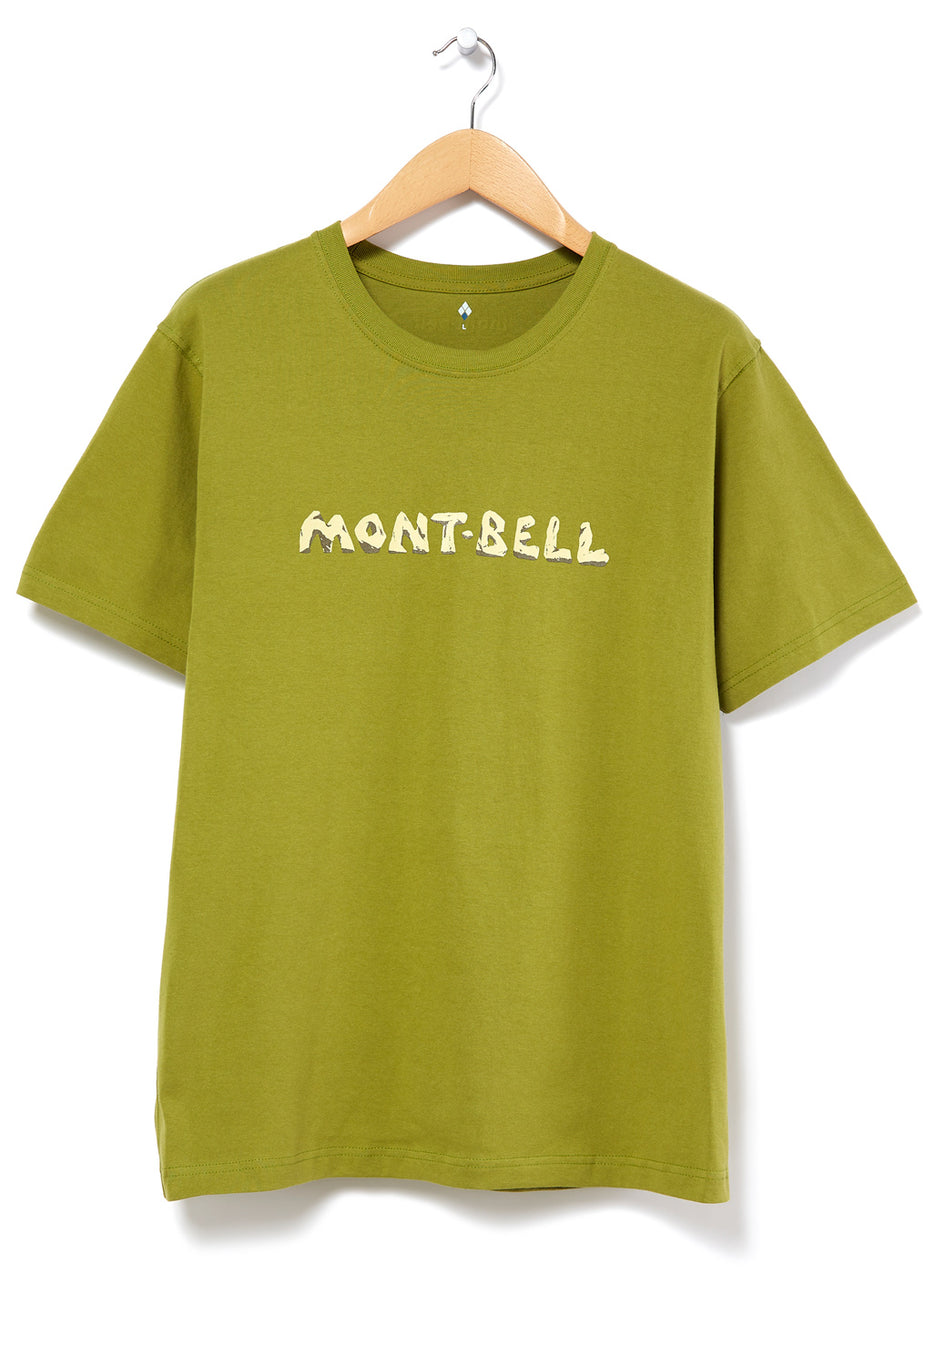 Montbell Pear Skin Cotton mont-bell Iwa Logo T-Shirt 15